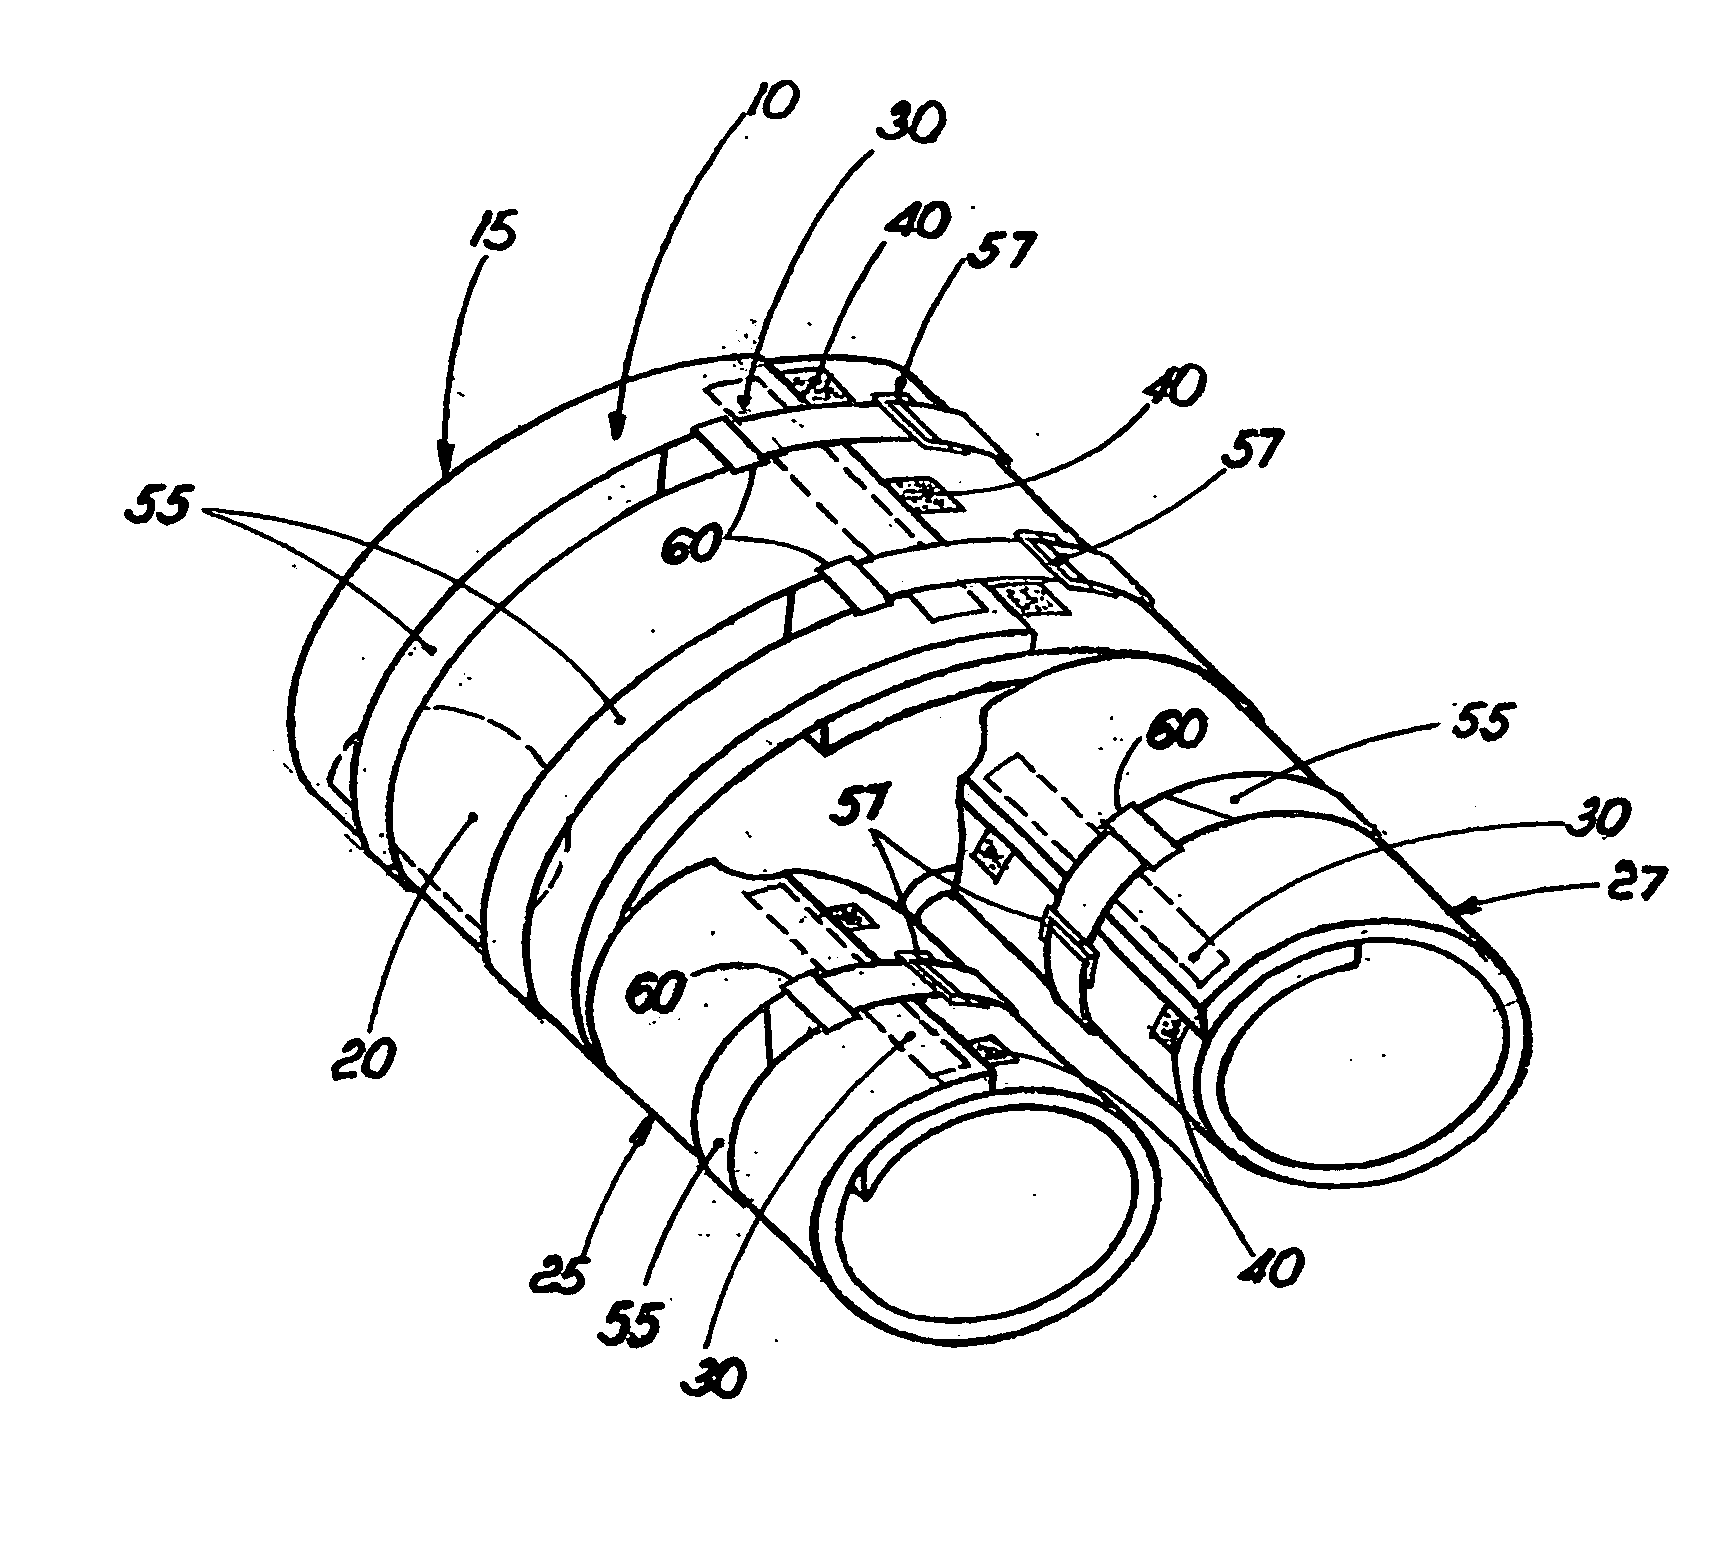 Protective enclosure for body support